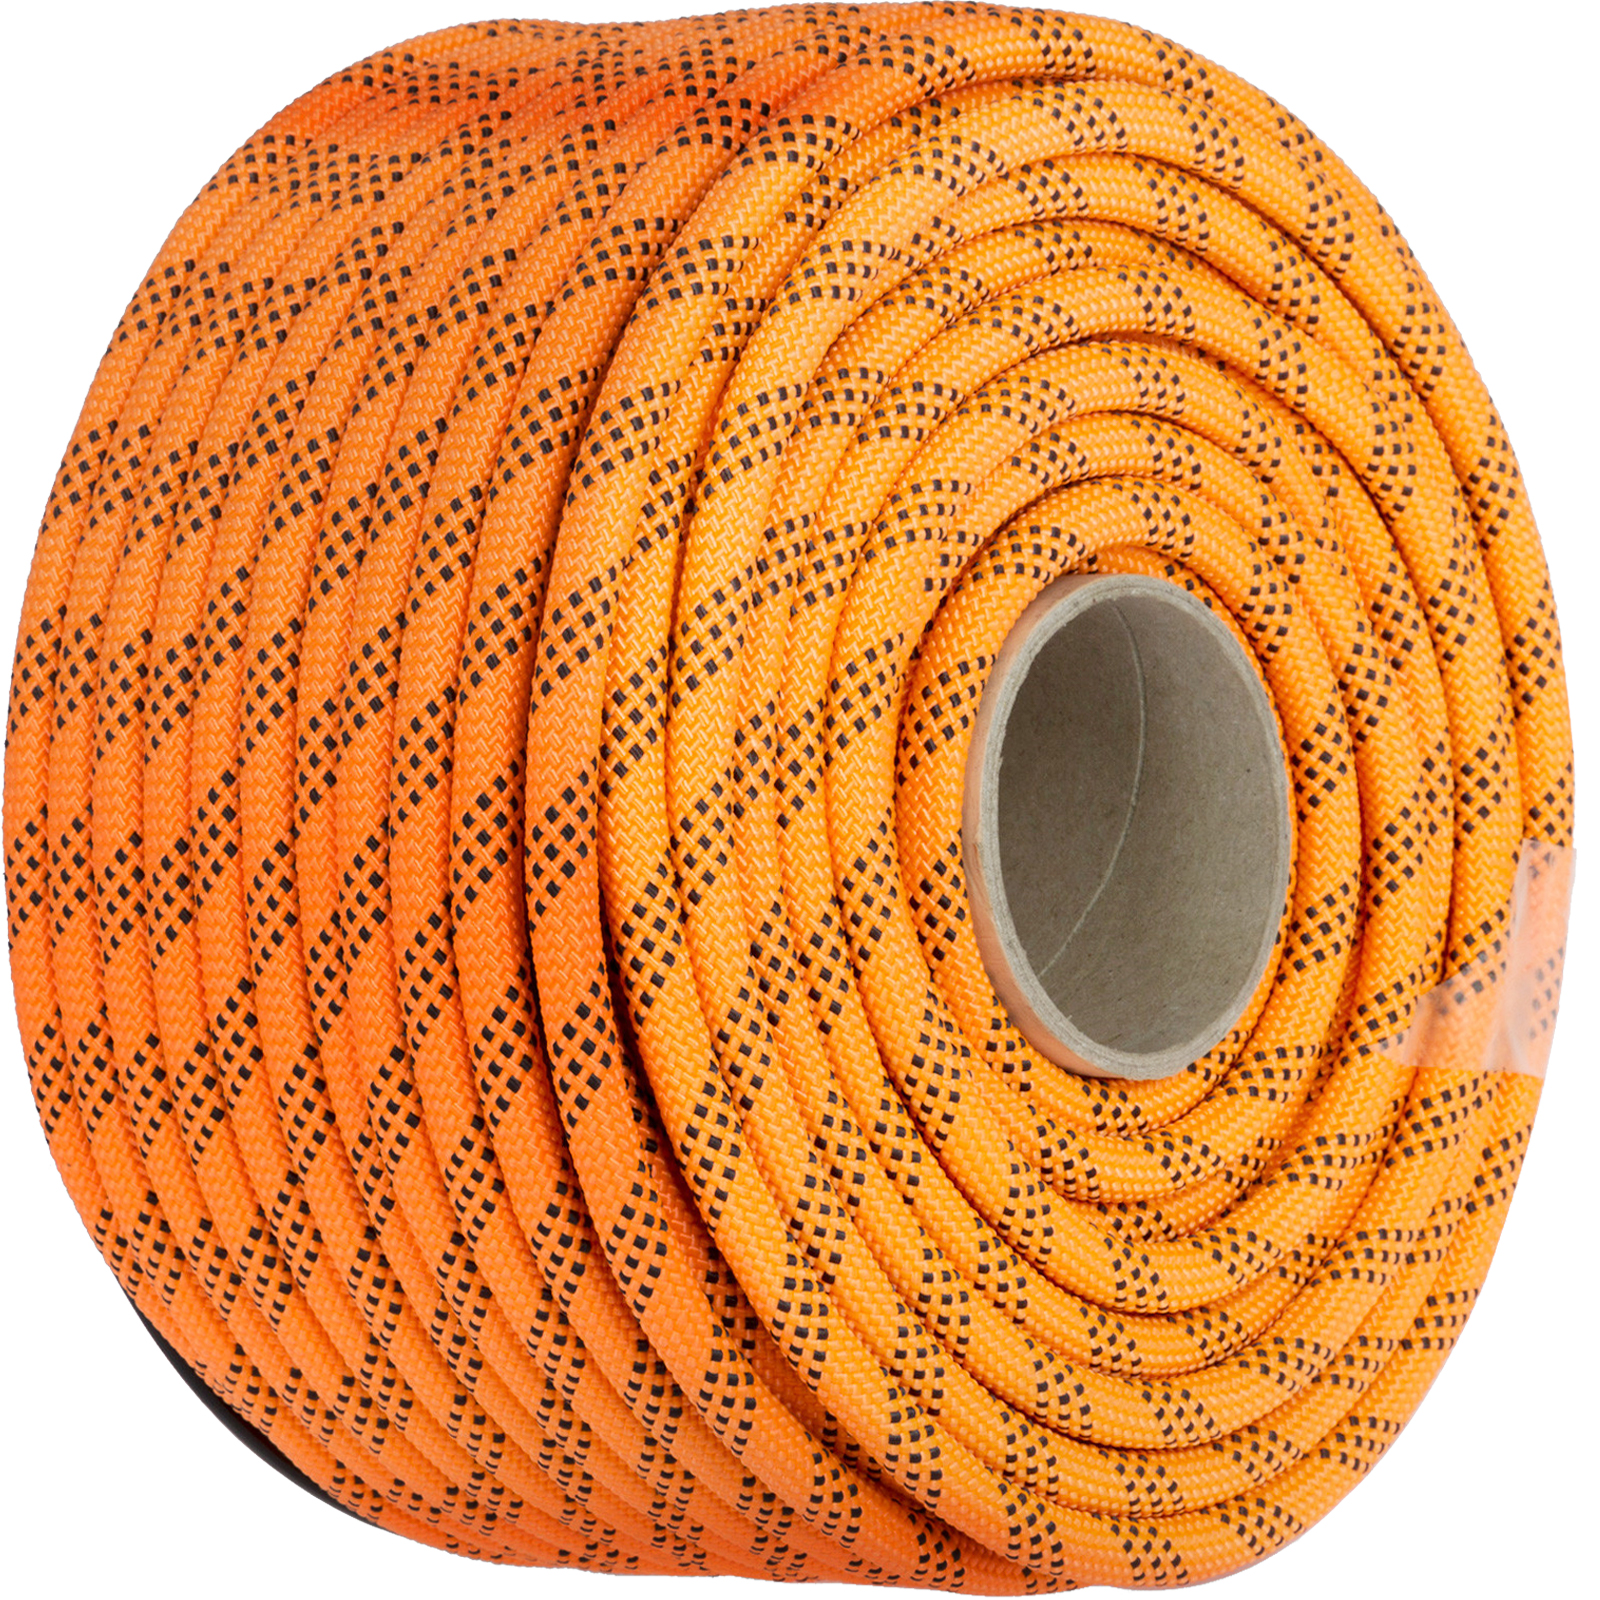 Polyester Rope 9/16" X 200',load And Pulling Rope, 8600lbsbreaking Strength(not Suitable For Rocking Climbing, Mountain Climbing, Hanging People, Etc.) от Vevor Many GEOs